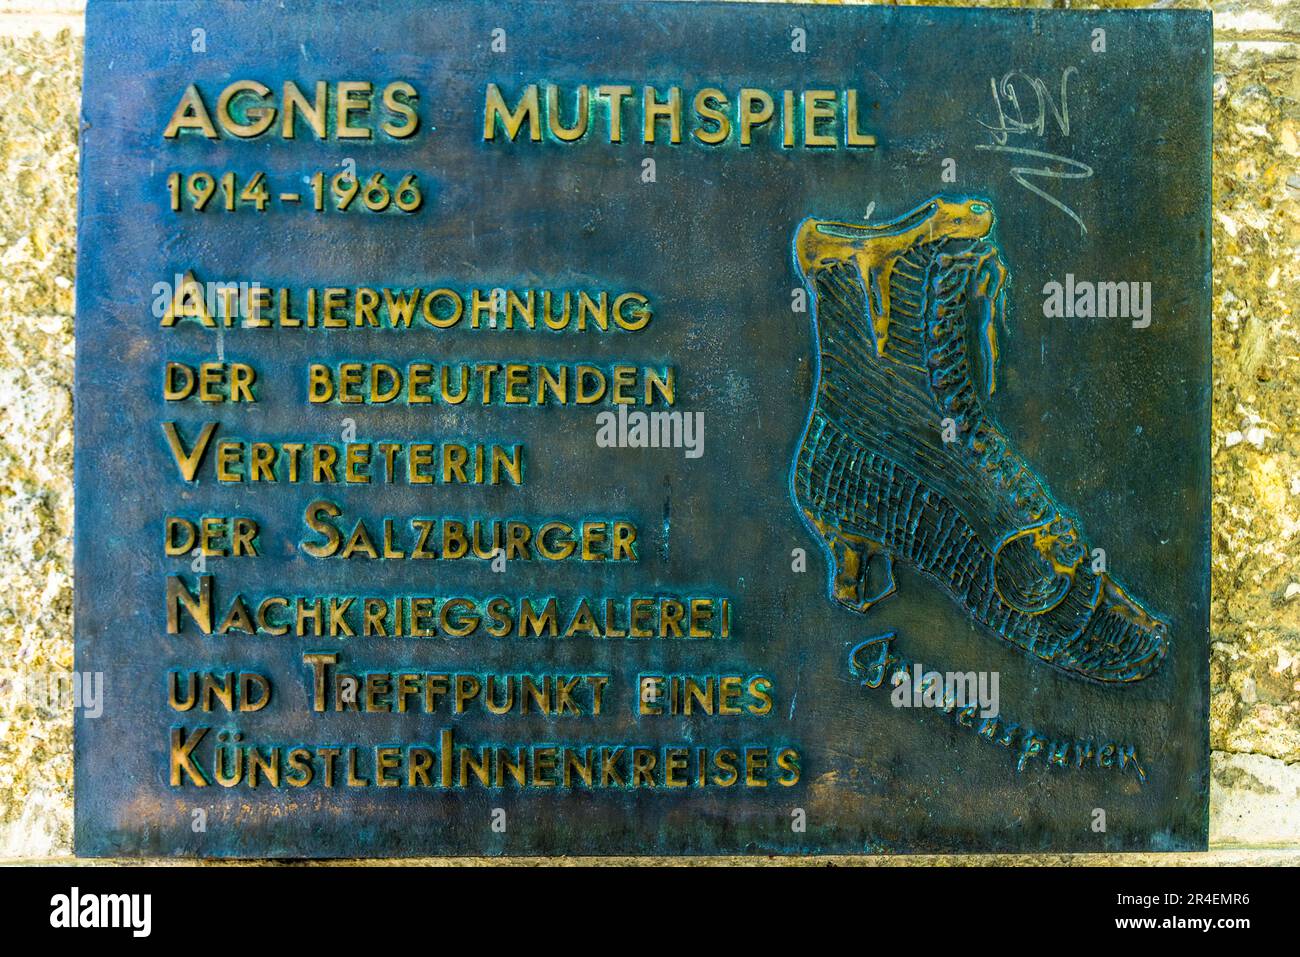 Sign at the place of work of Agnes Muthspiel (1914 - 1966). The studio apartment of the painter was also the meeting place of a circle of artists. Traces of women in Salzburg, Austria Stock Photo